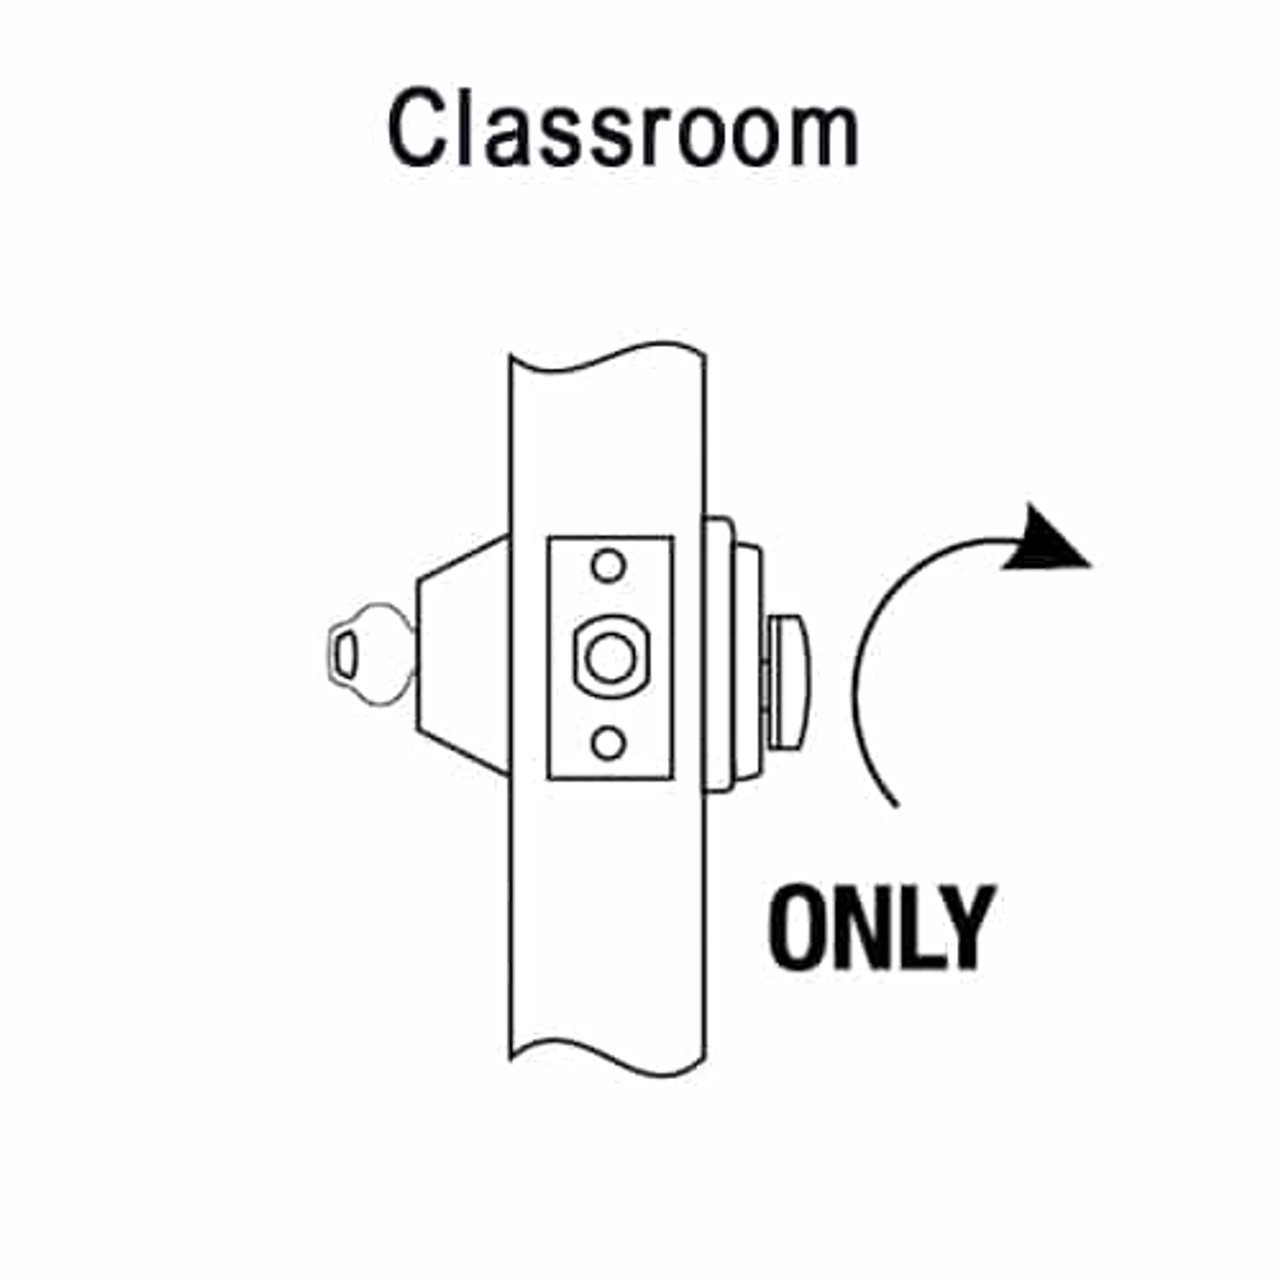 DL2217-613-CL6 Corbin DL2200 Series Classroom Cylindrical Deadlocks with Single Cylinder in Oil Rubbed Bronze